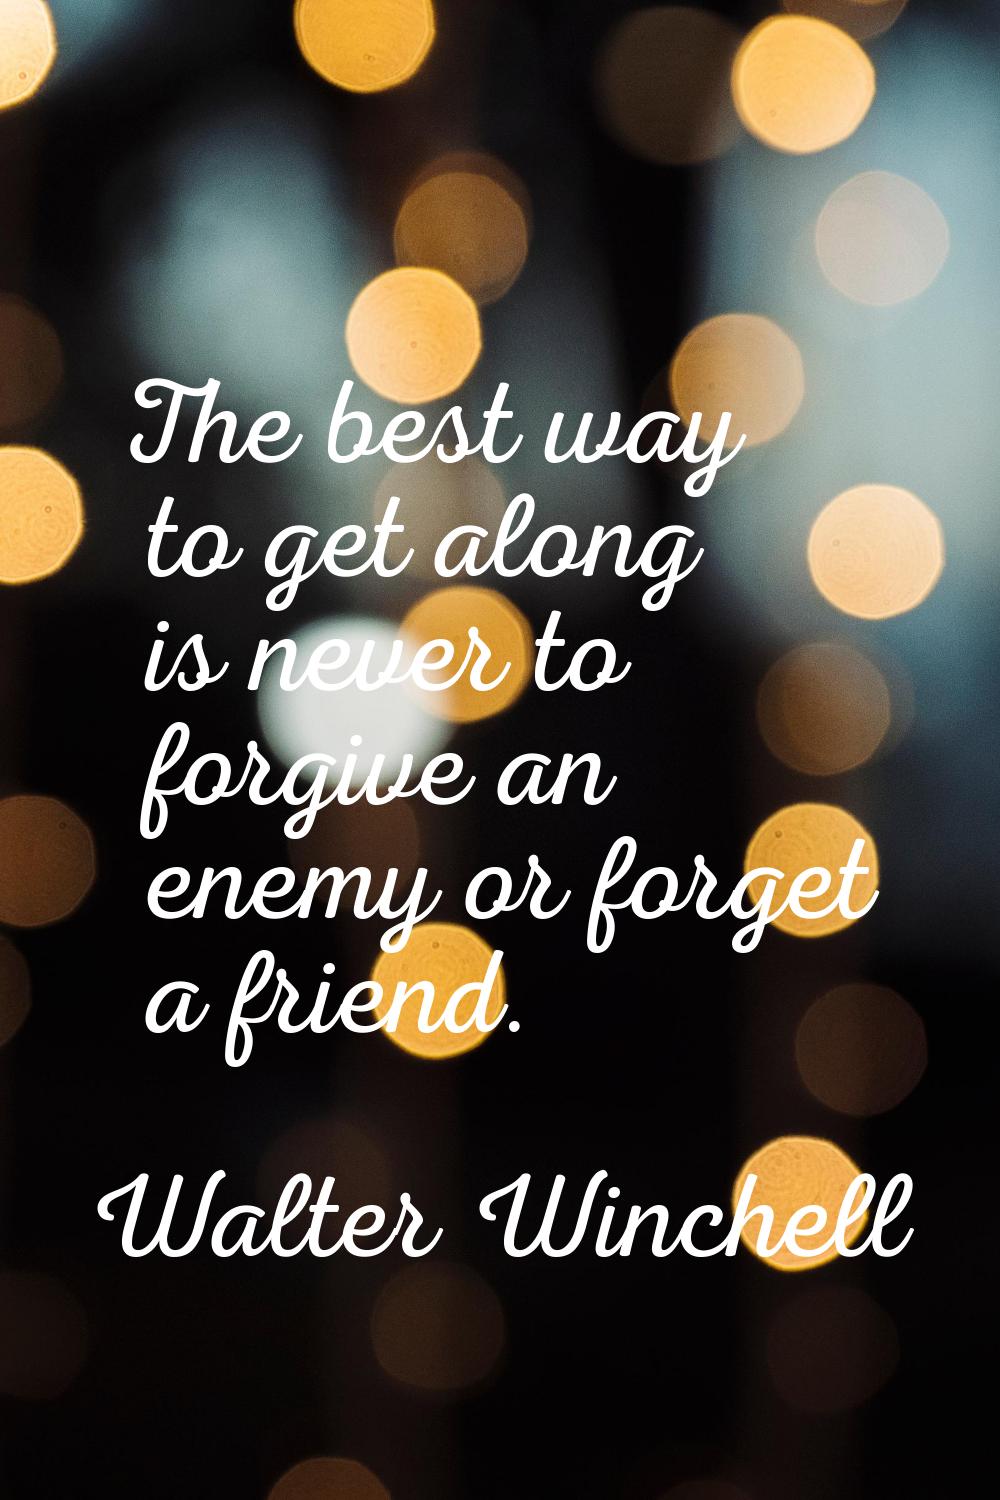 The best way to get along is never to forgive an enemy or forget a friend.